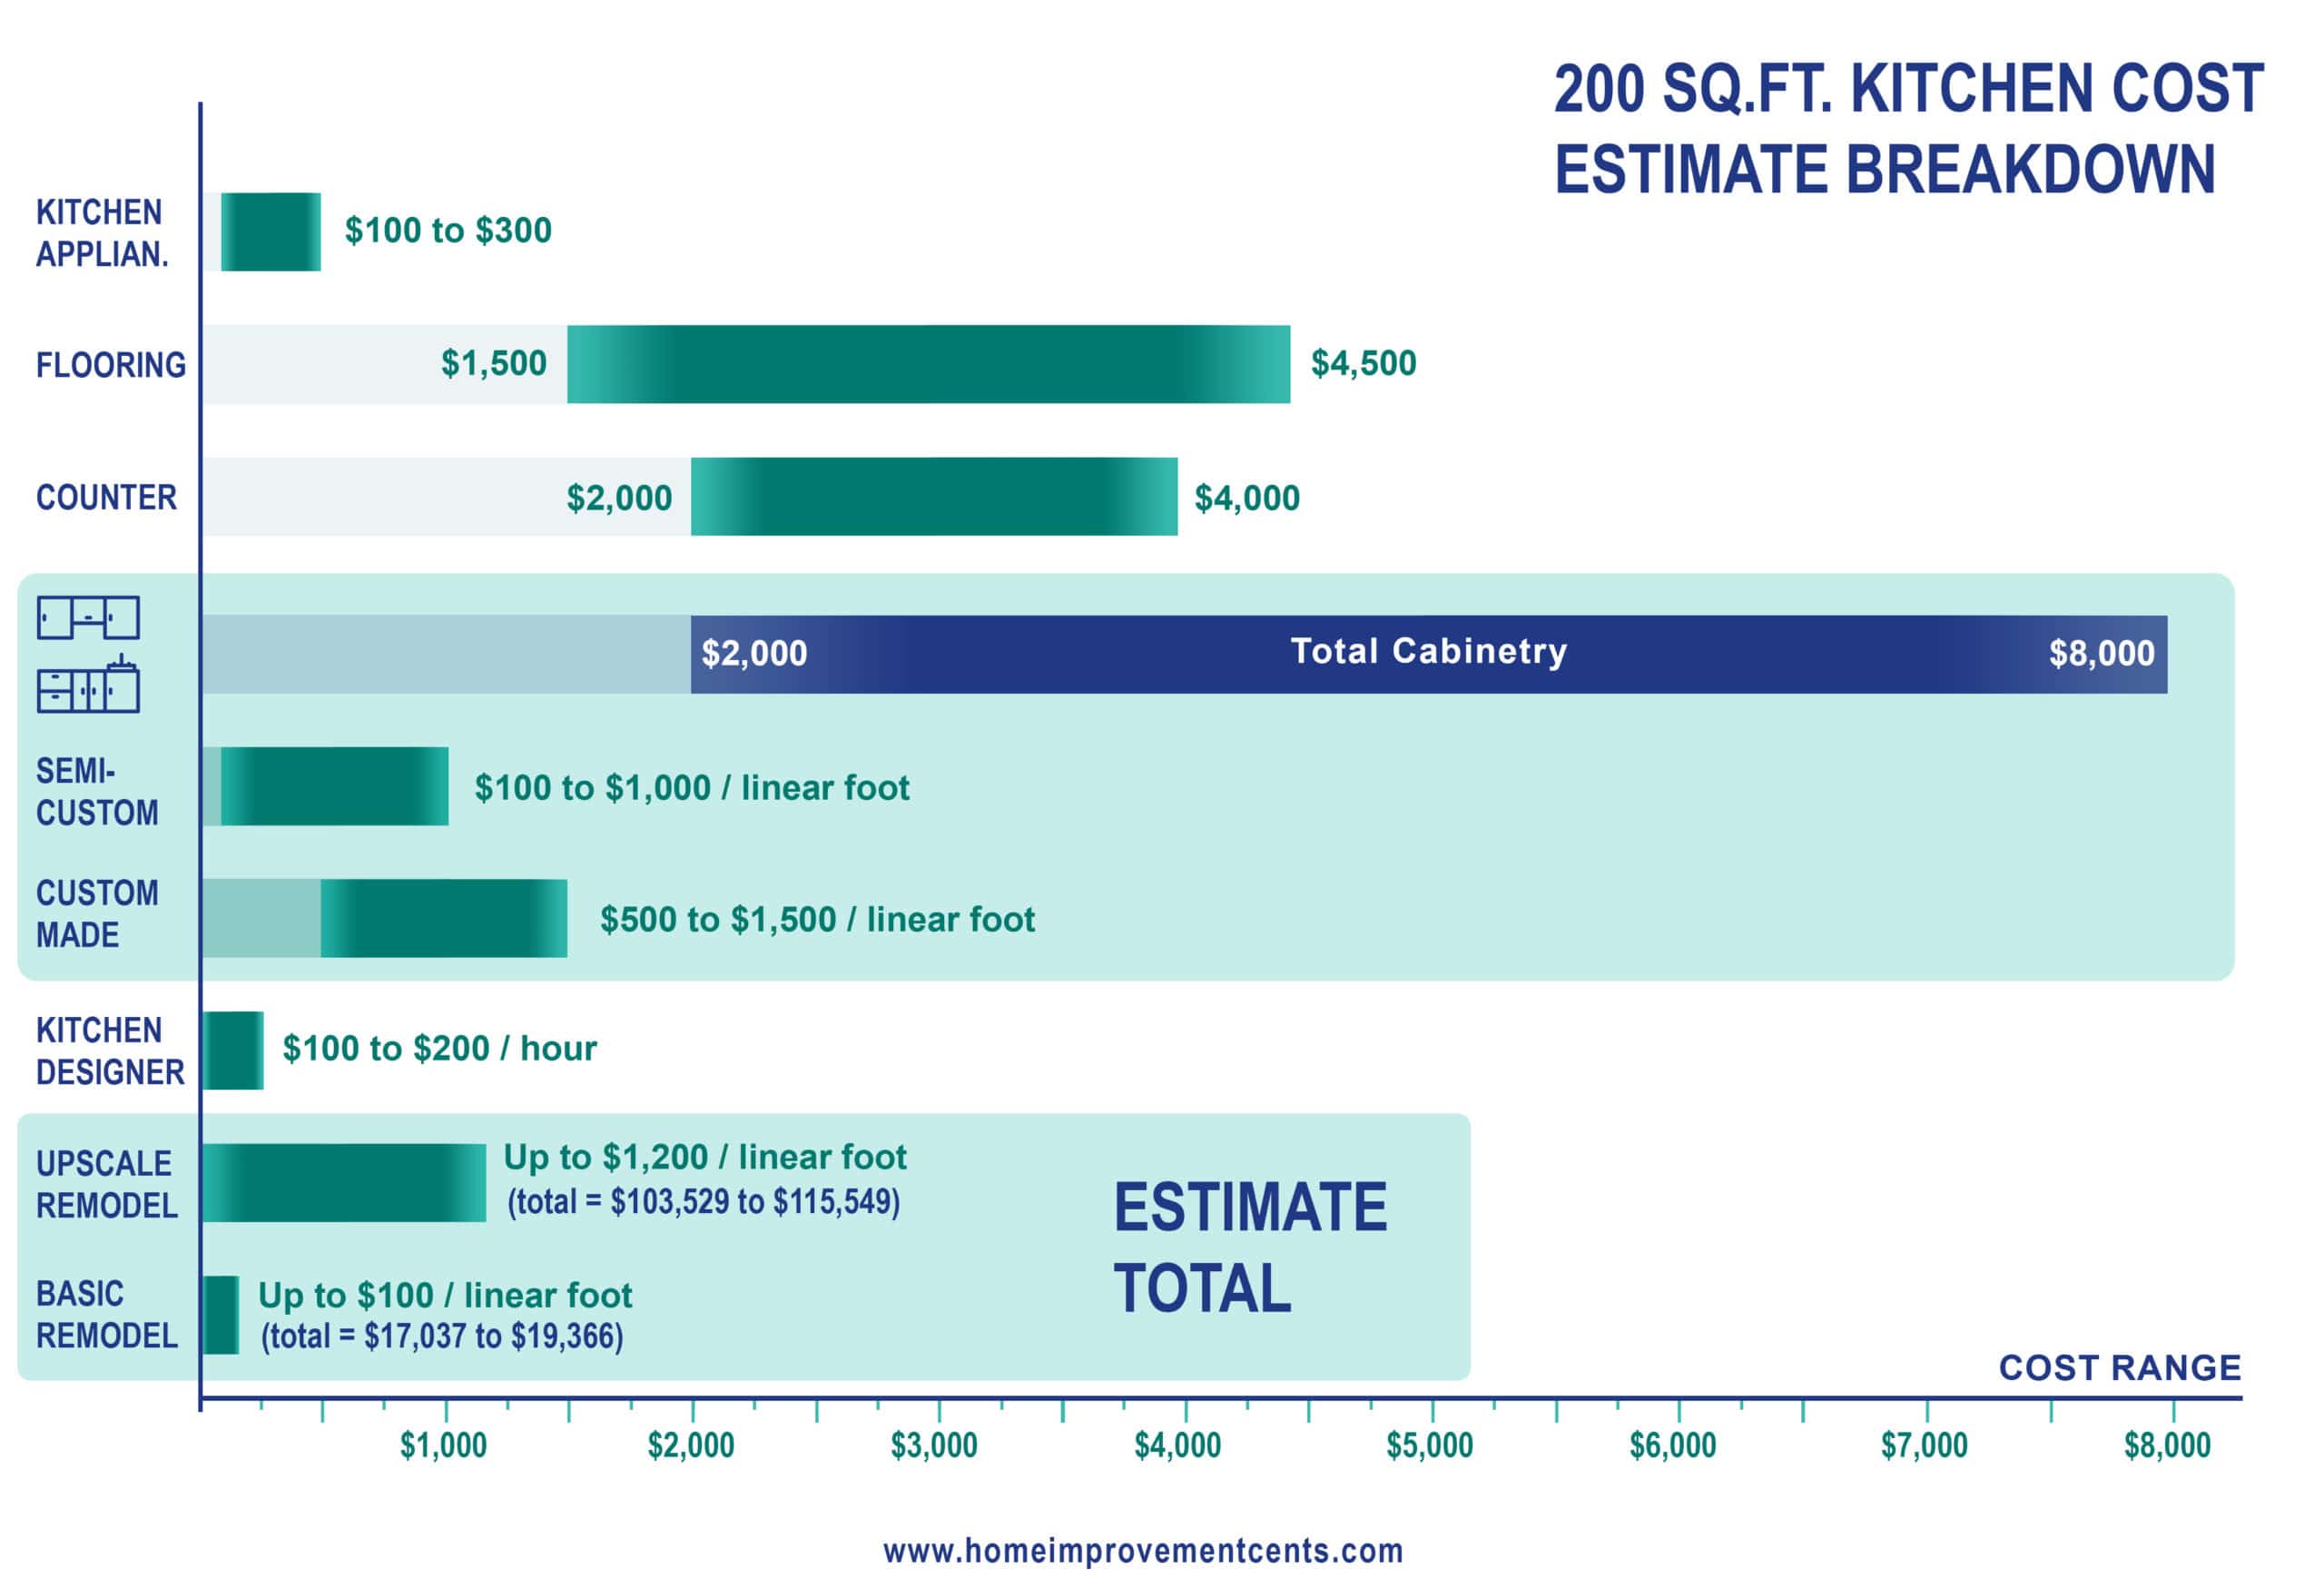 Breakdown of the costs for 10x20 kitchen remodel